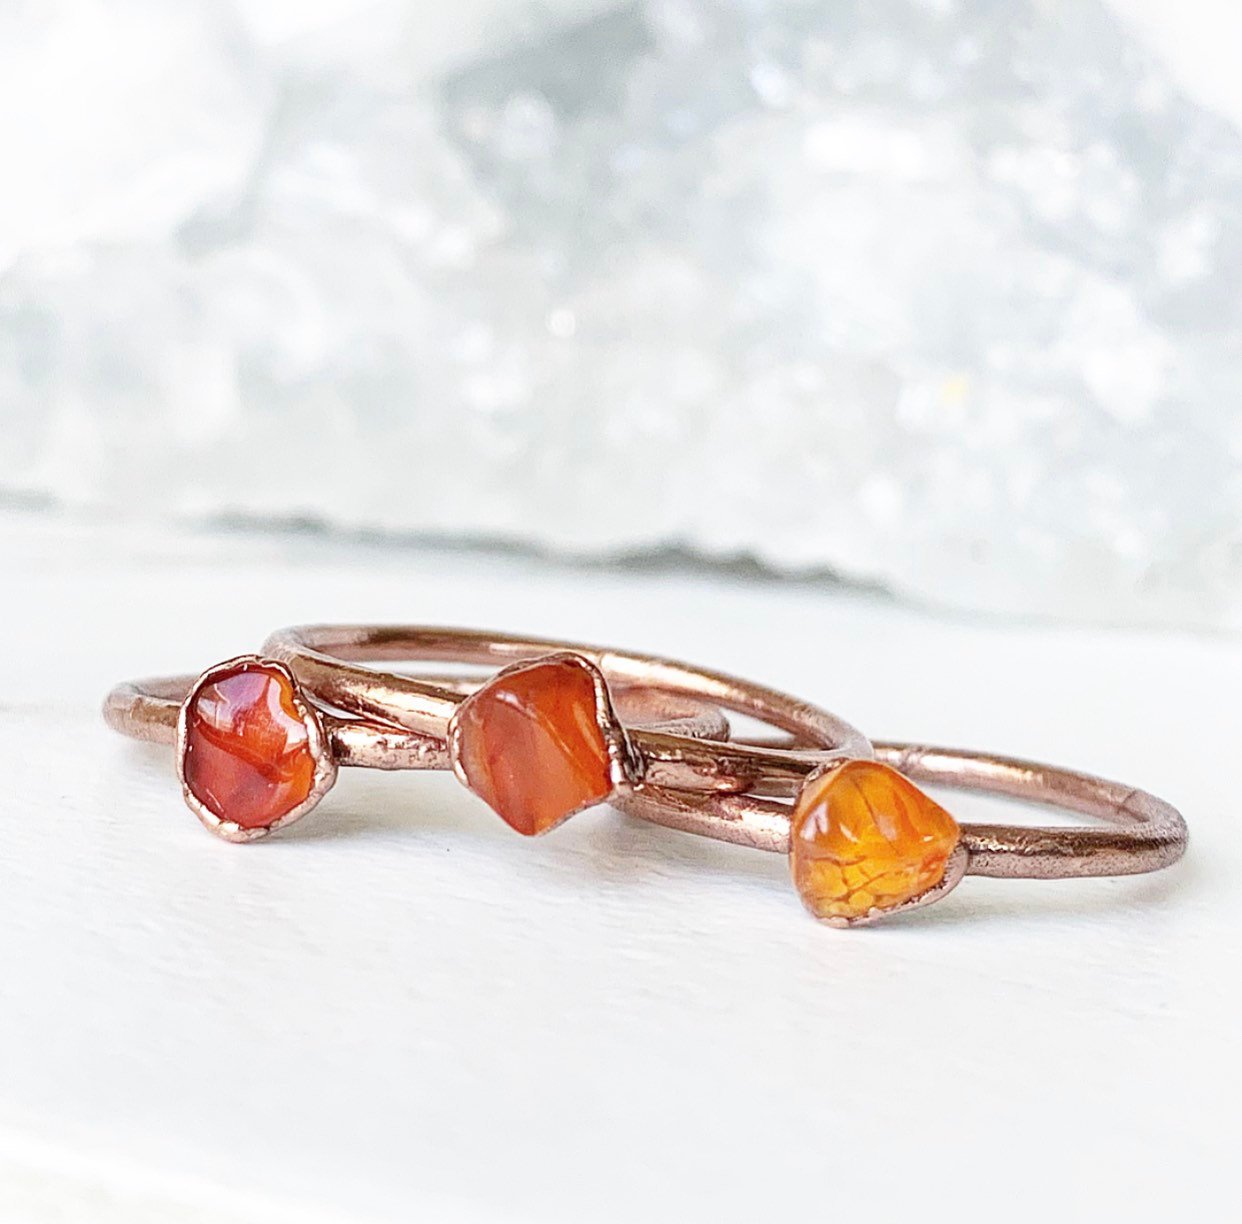 Dainty Carnelian Stone Ring, Delicate Healing Crystal Jewelry, Tiny Carnelian Crystal Ring, Healing Crystal Gift, Raw Stone Stacking Ring